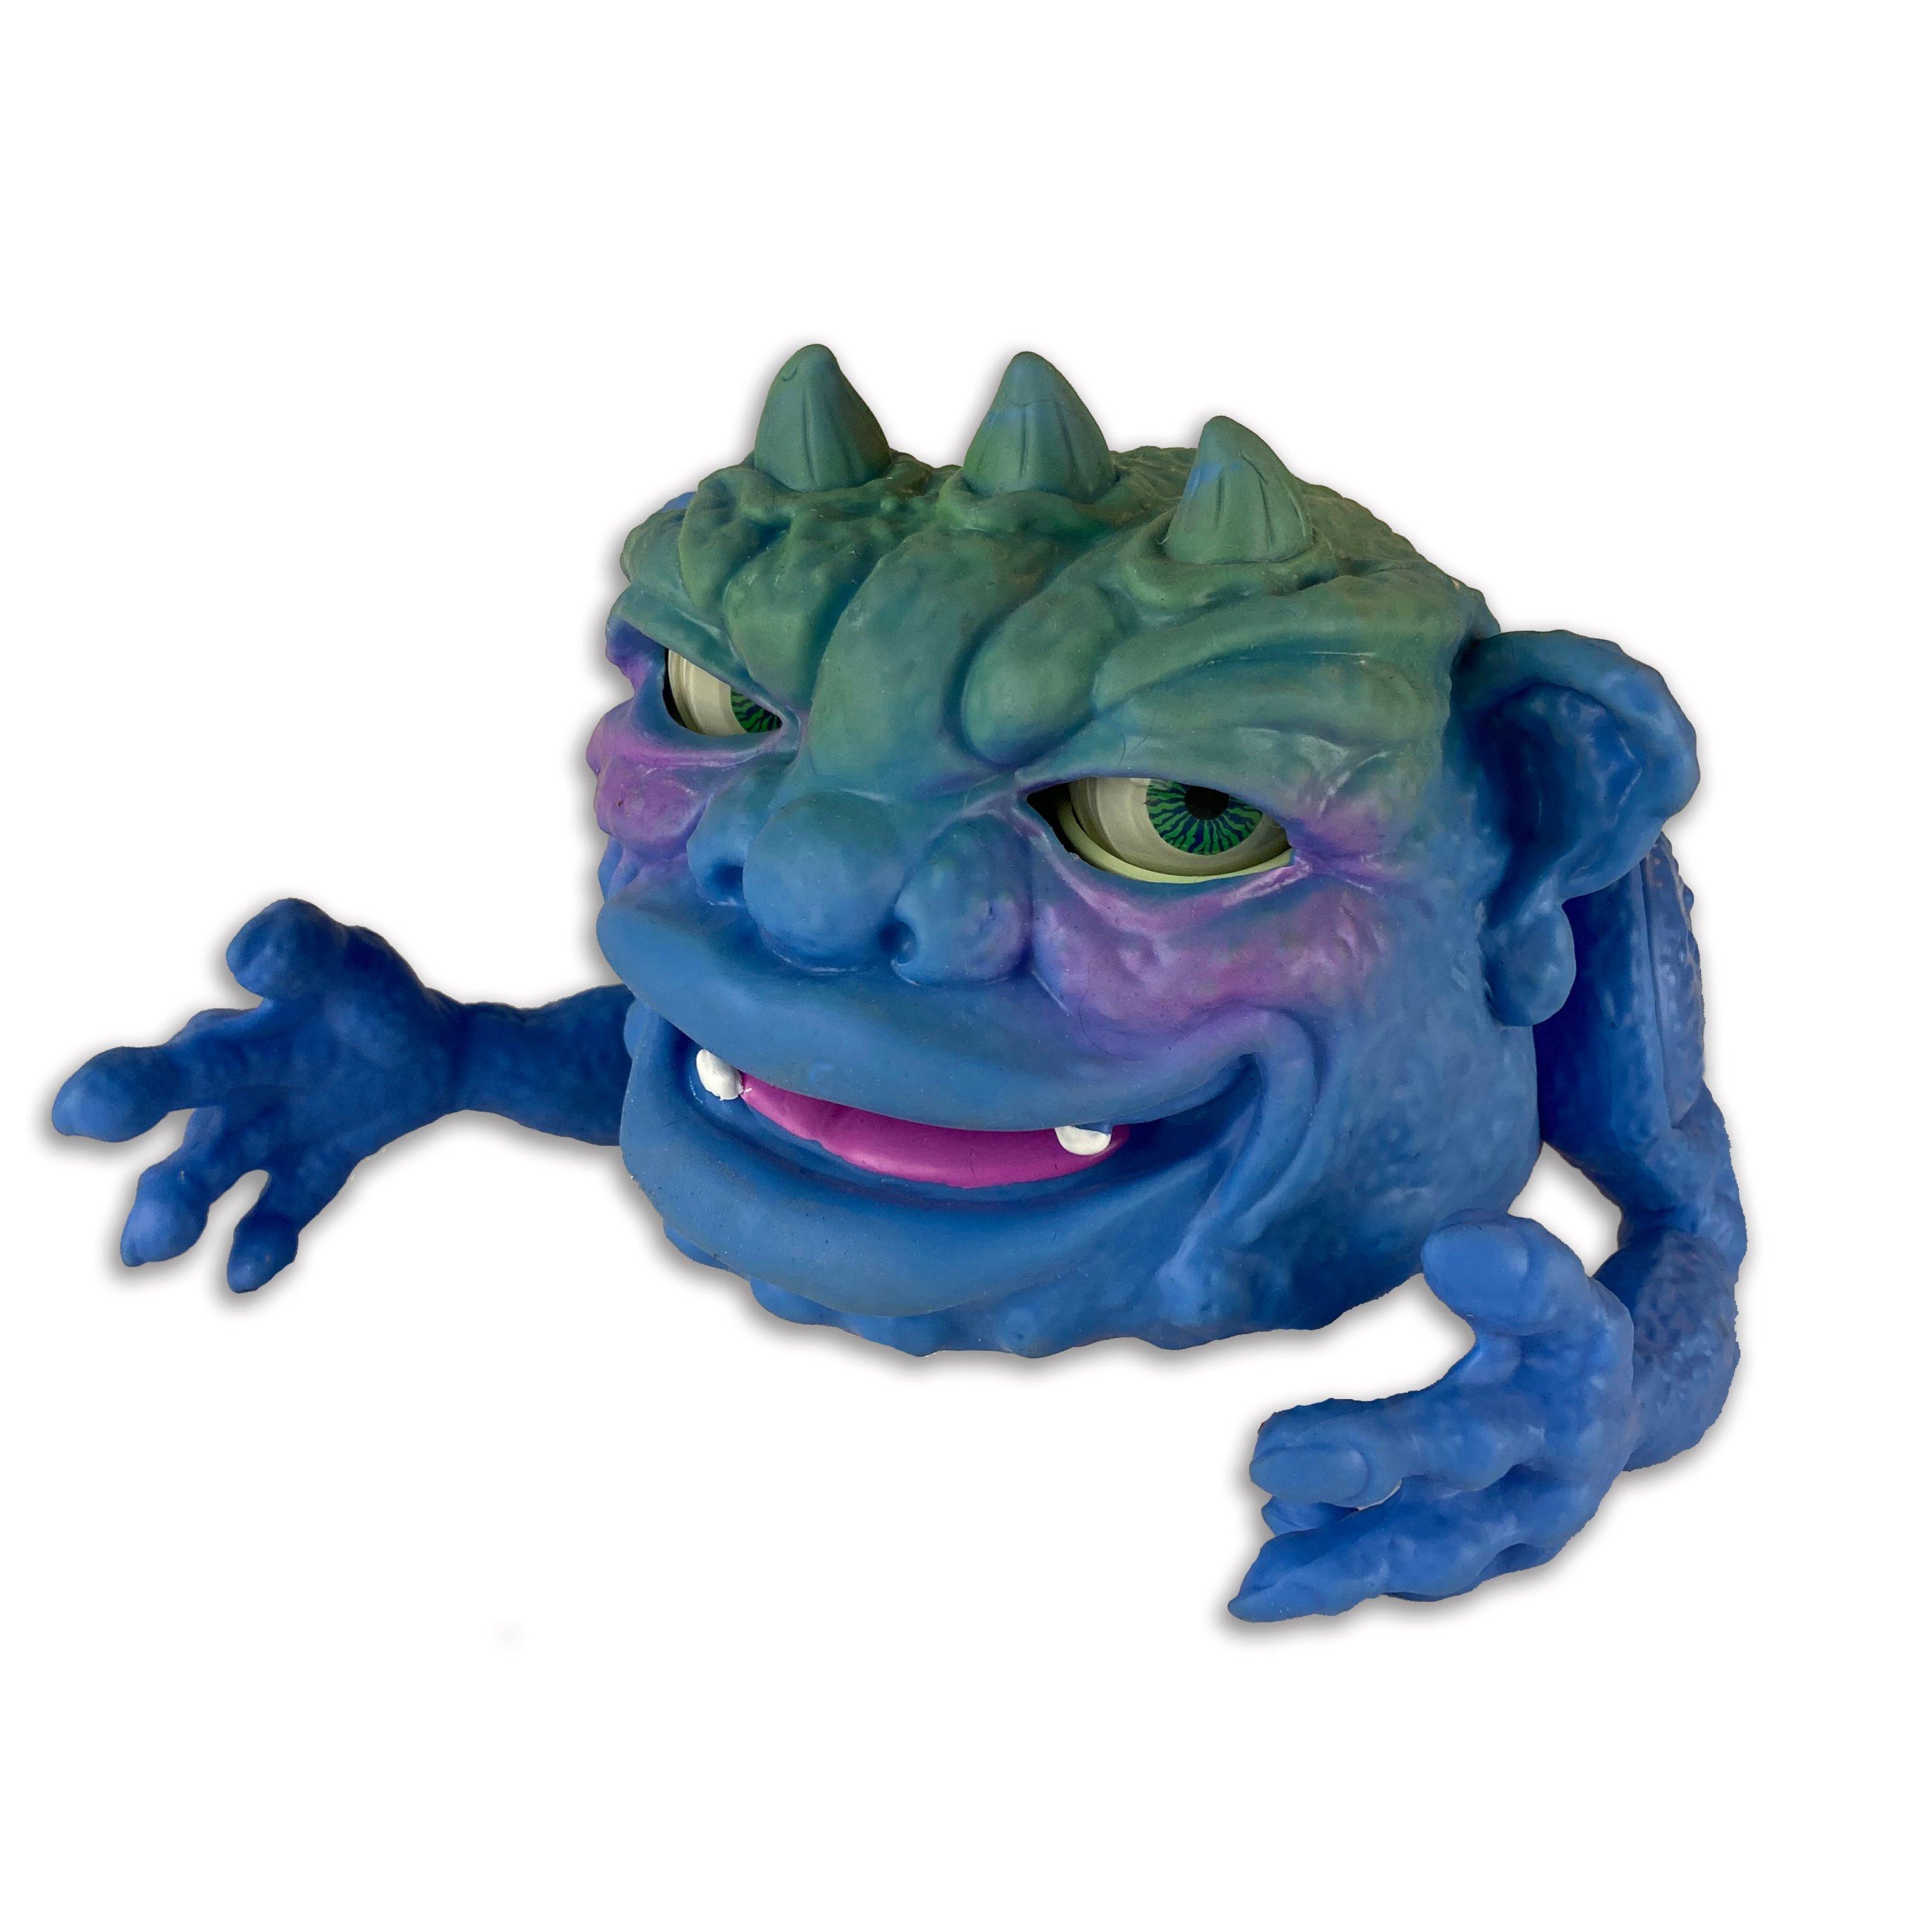 Popular Retro Toy from The 80's for Kids and Collectors Boglins King Dwork 8” Collectible Figure with Super Stretchy Skin & Movable Eyes and Mouth 